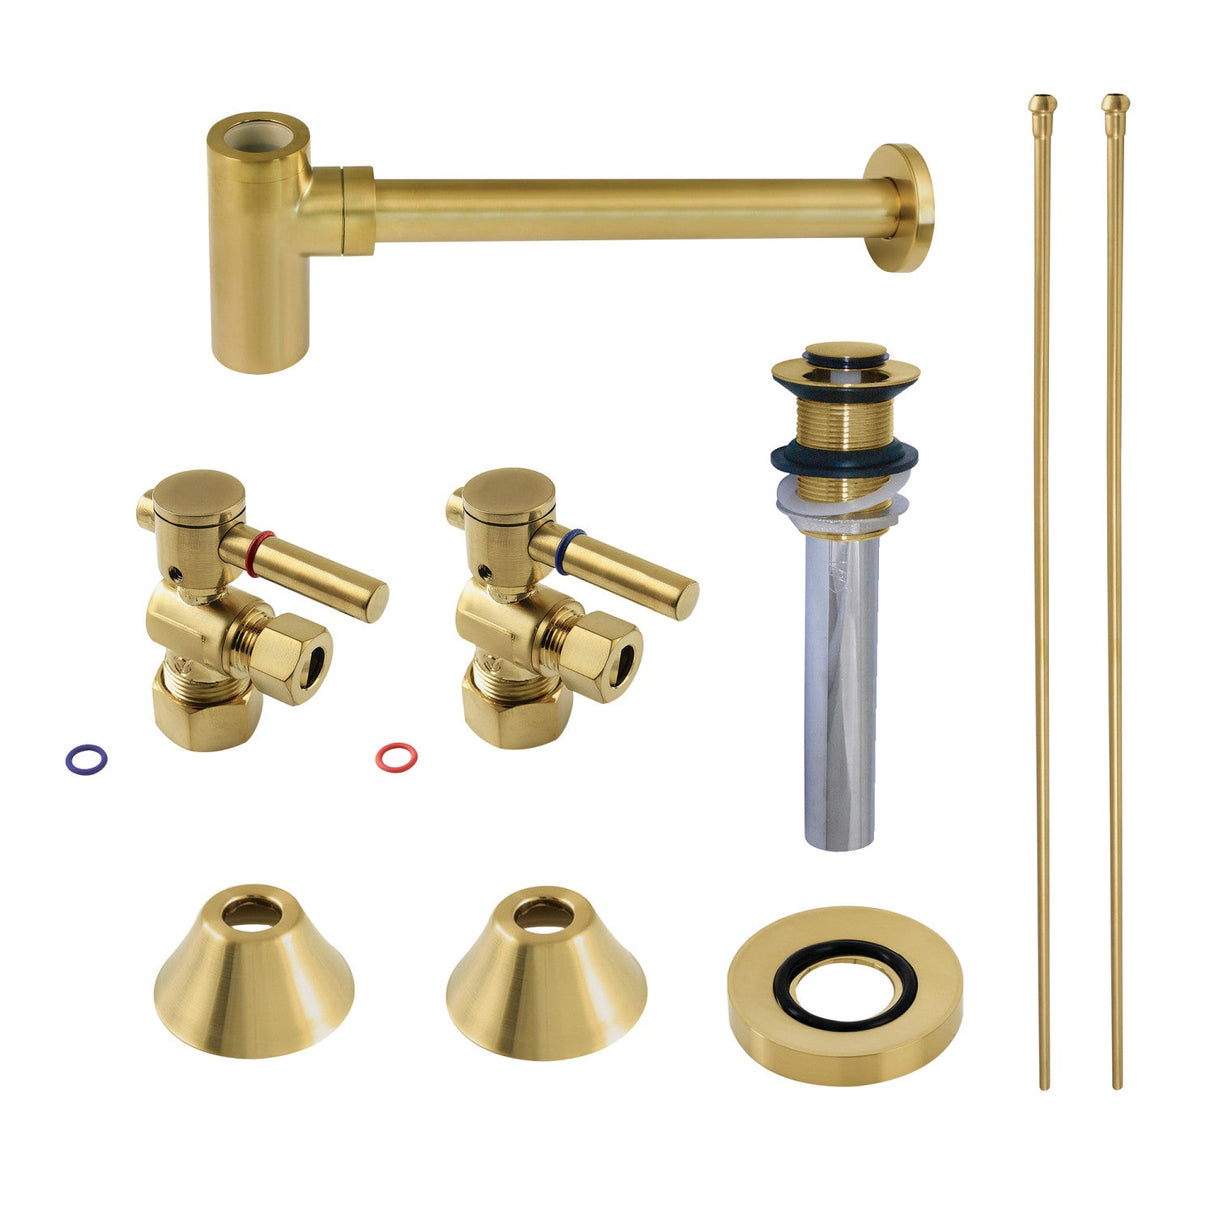 Trimscape CC53307DLVKB30 Contemporary Plumbing Sink Trim Kit with Bottle Trap and Drain, Brushed Brass